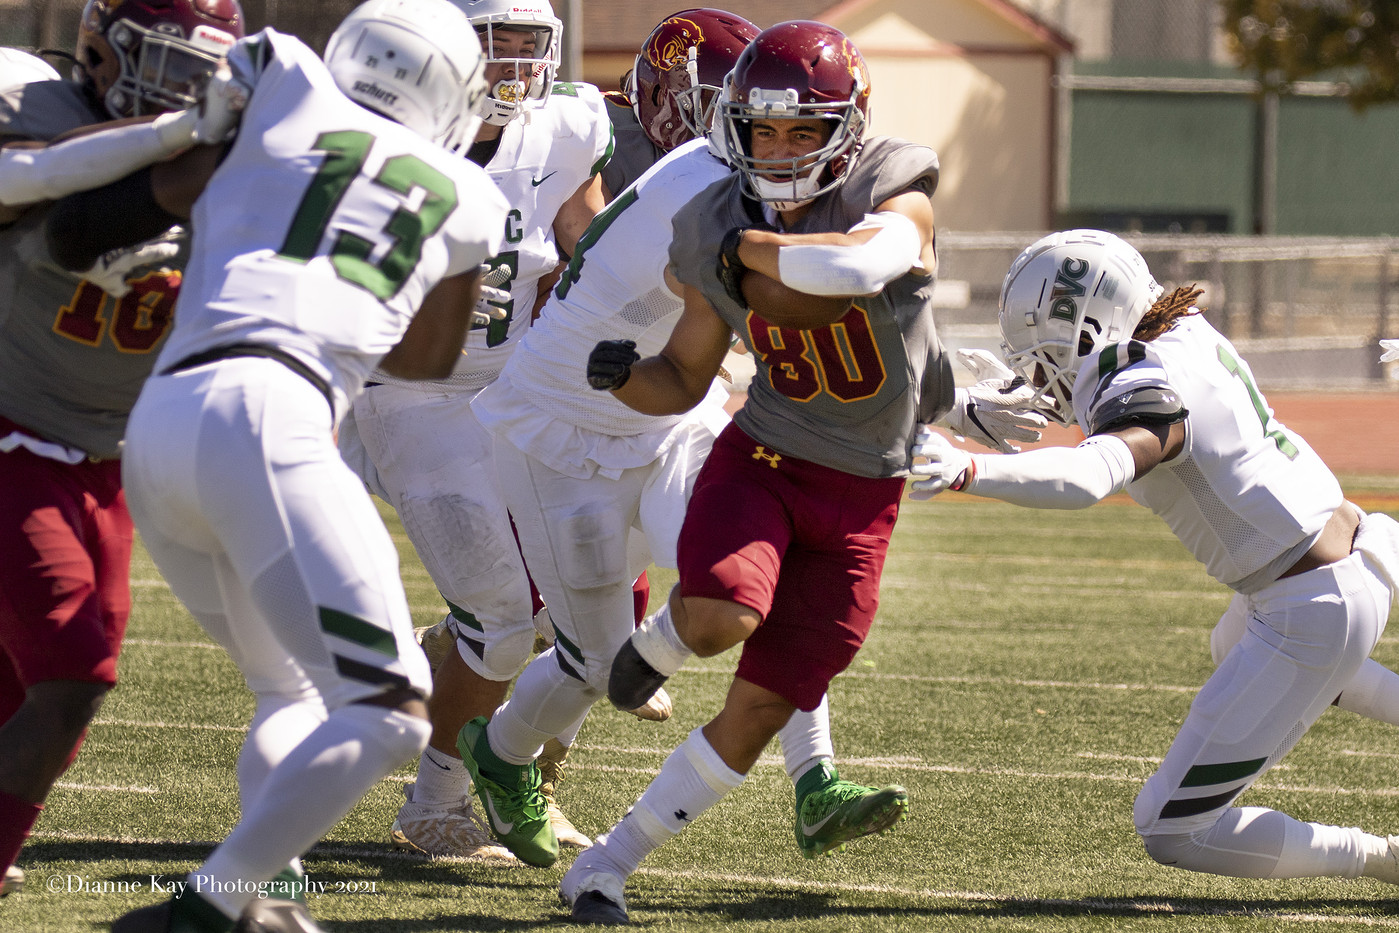 Sequoias scores early and beats the Panthers 16-0; City held scoreless for the 2nd straight week